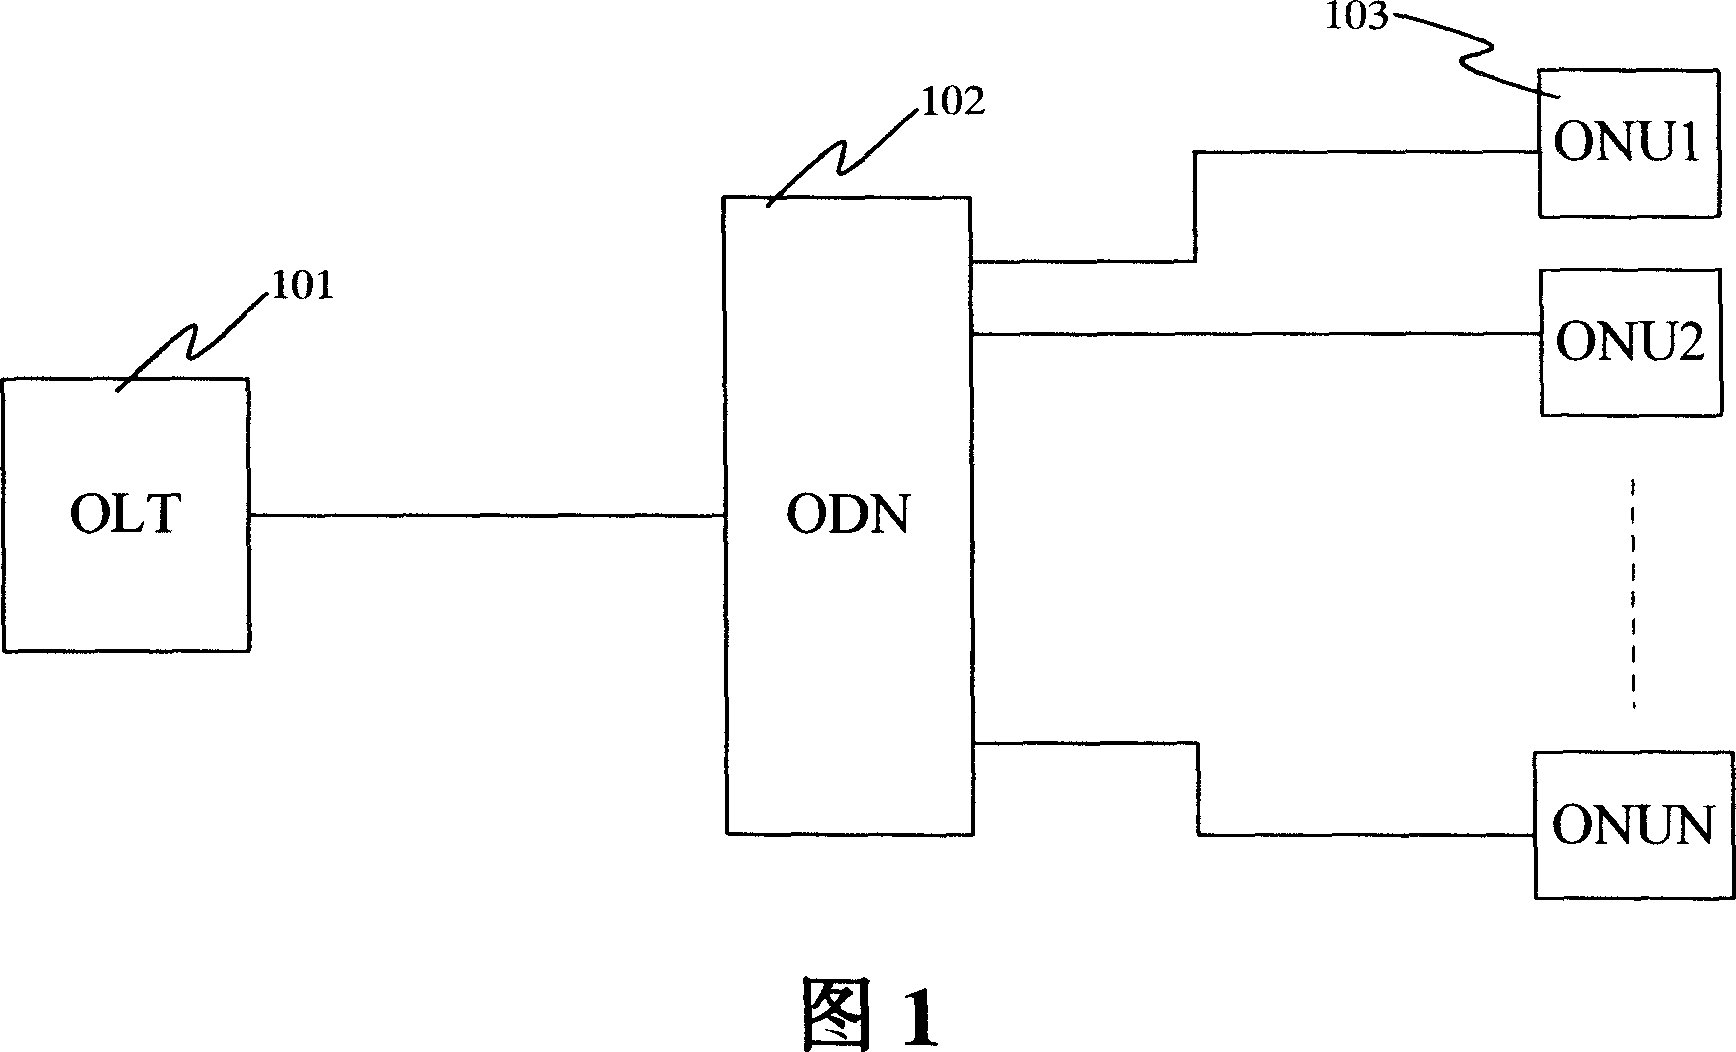 Wave division and time division passive optical network